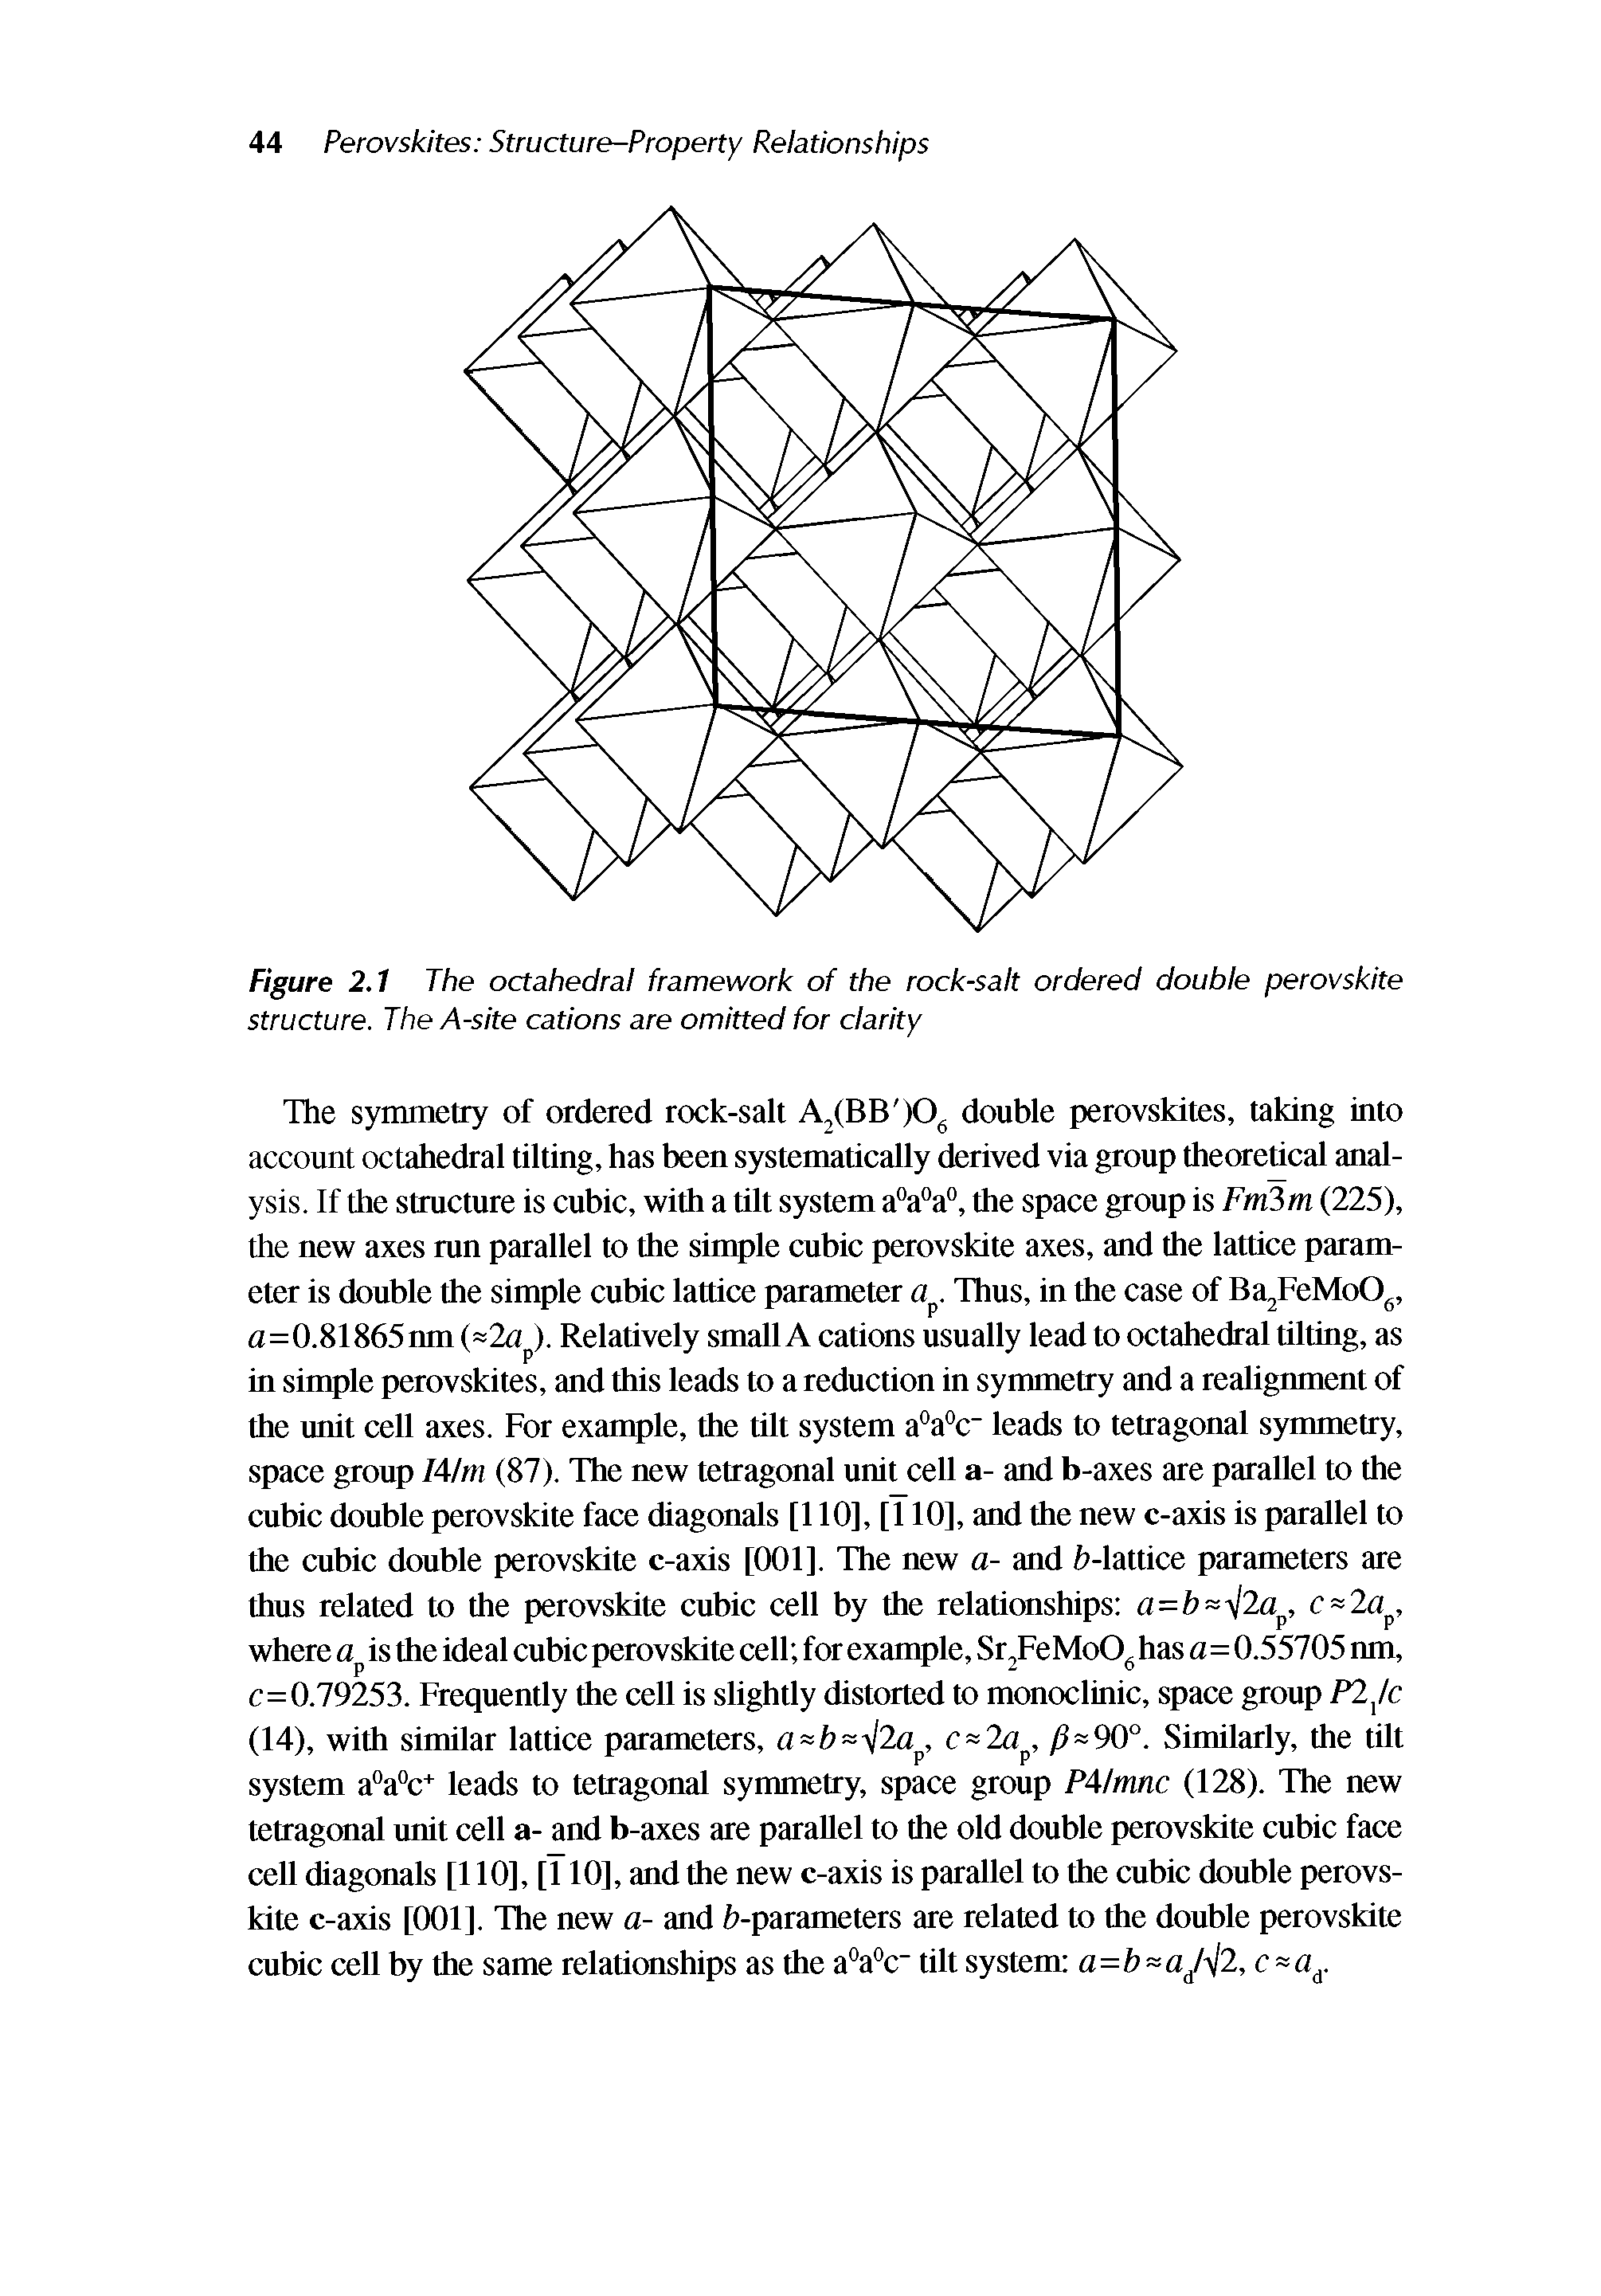 Figure 2.1 The octahedral framework of the rock-salt ordered double perovskite structure. The A-site cations are omitted for clarity...